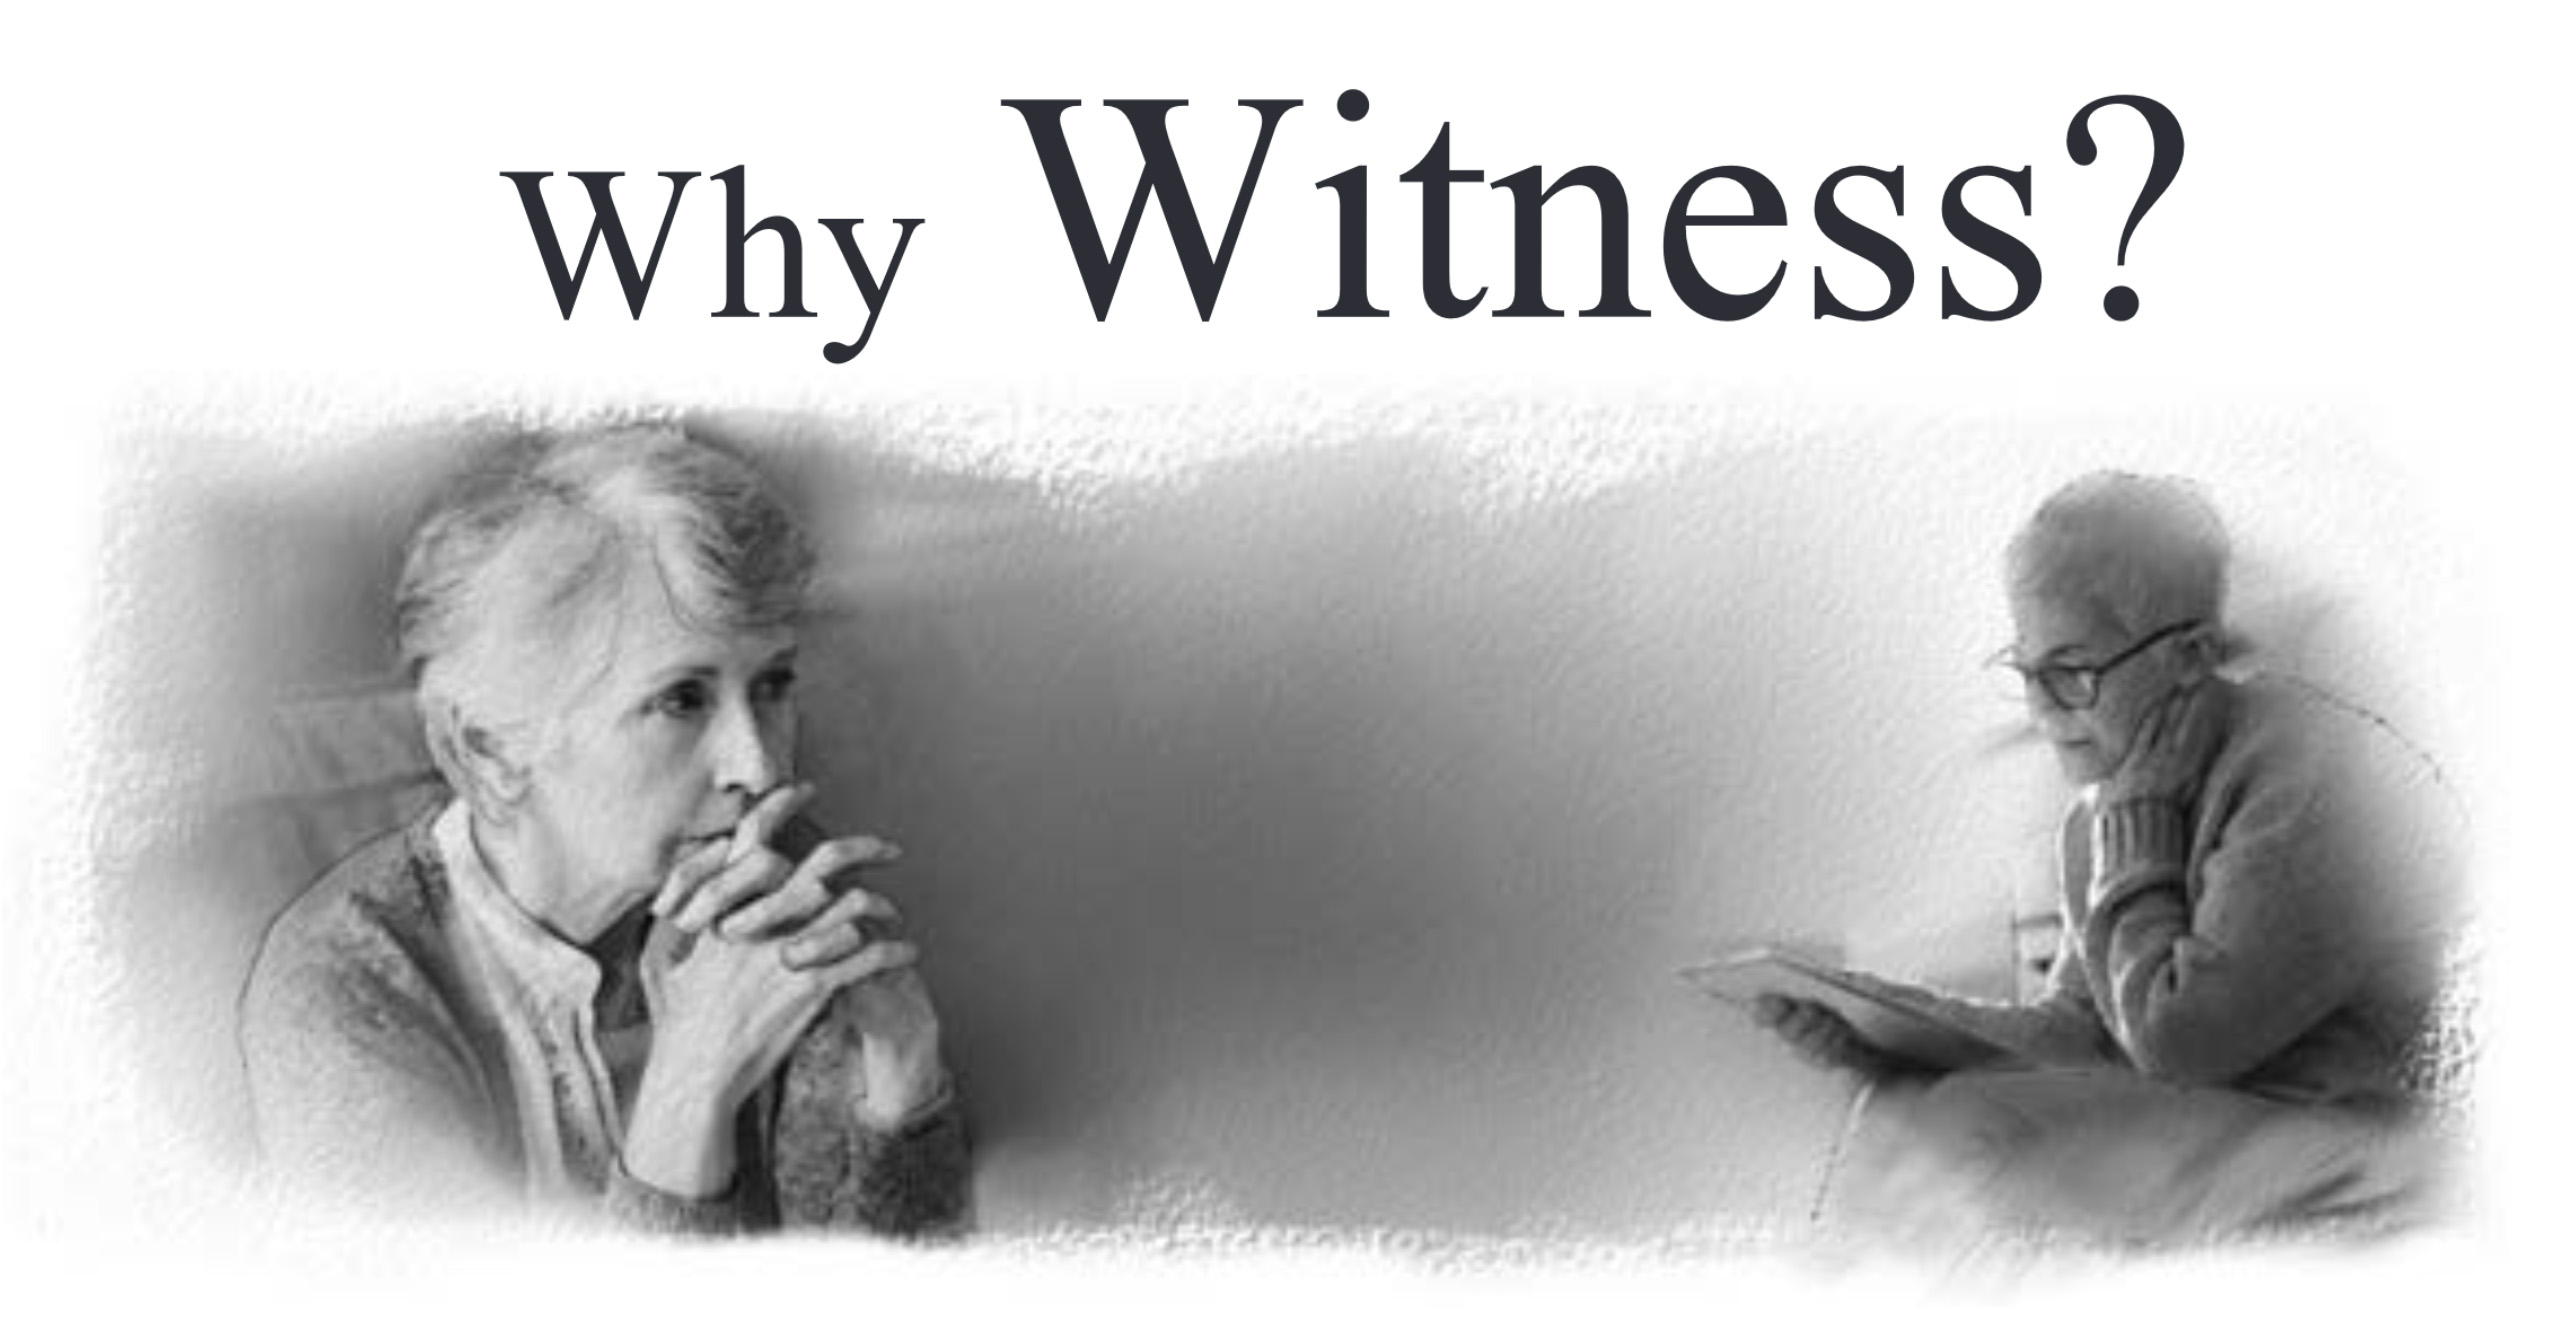 Why Witness?